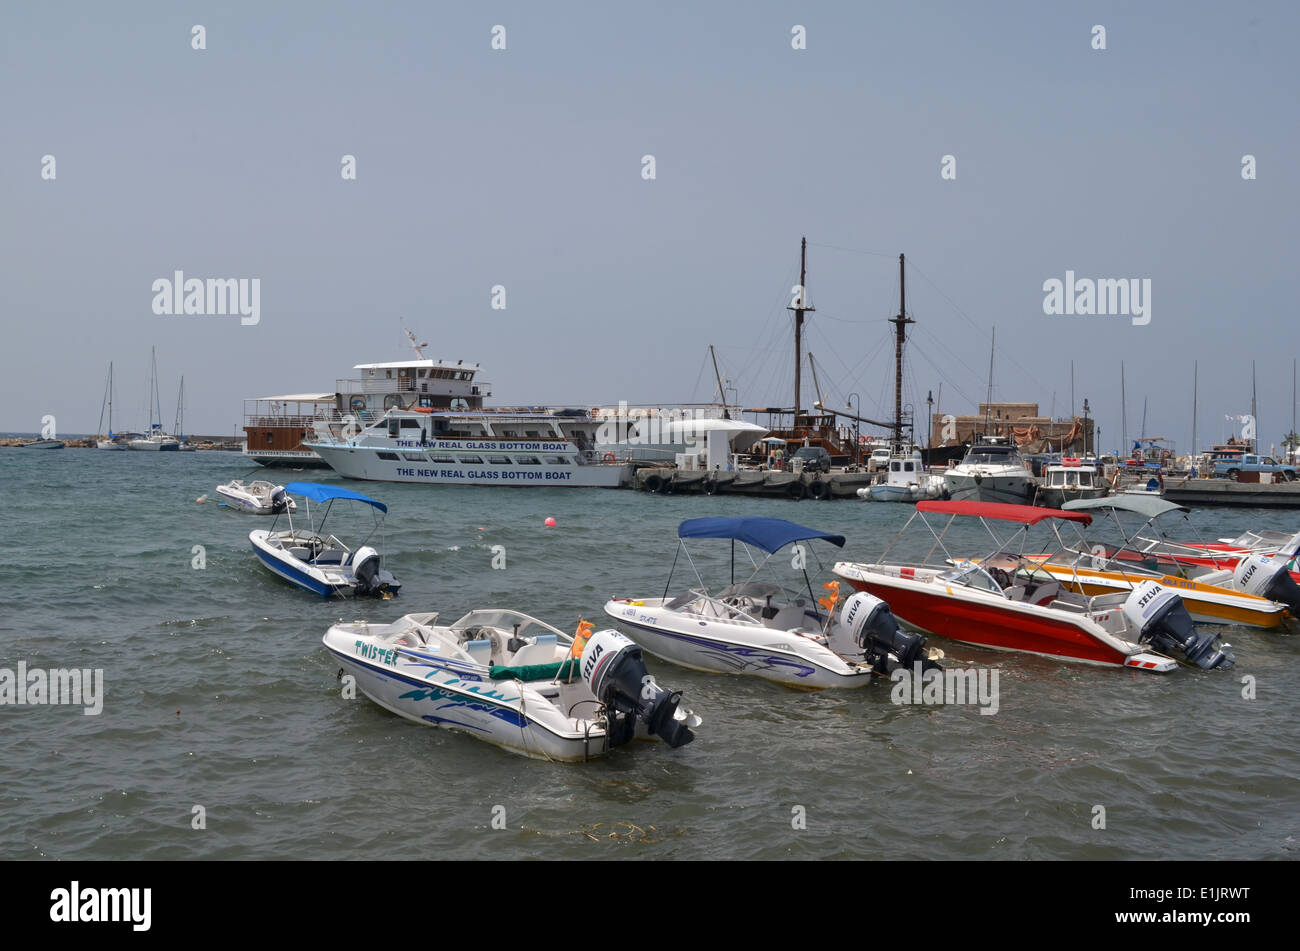 Boats and ships in Paphos Harbour, Cyprus. Stock Photo